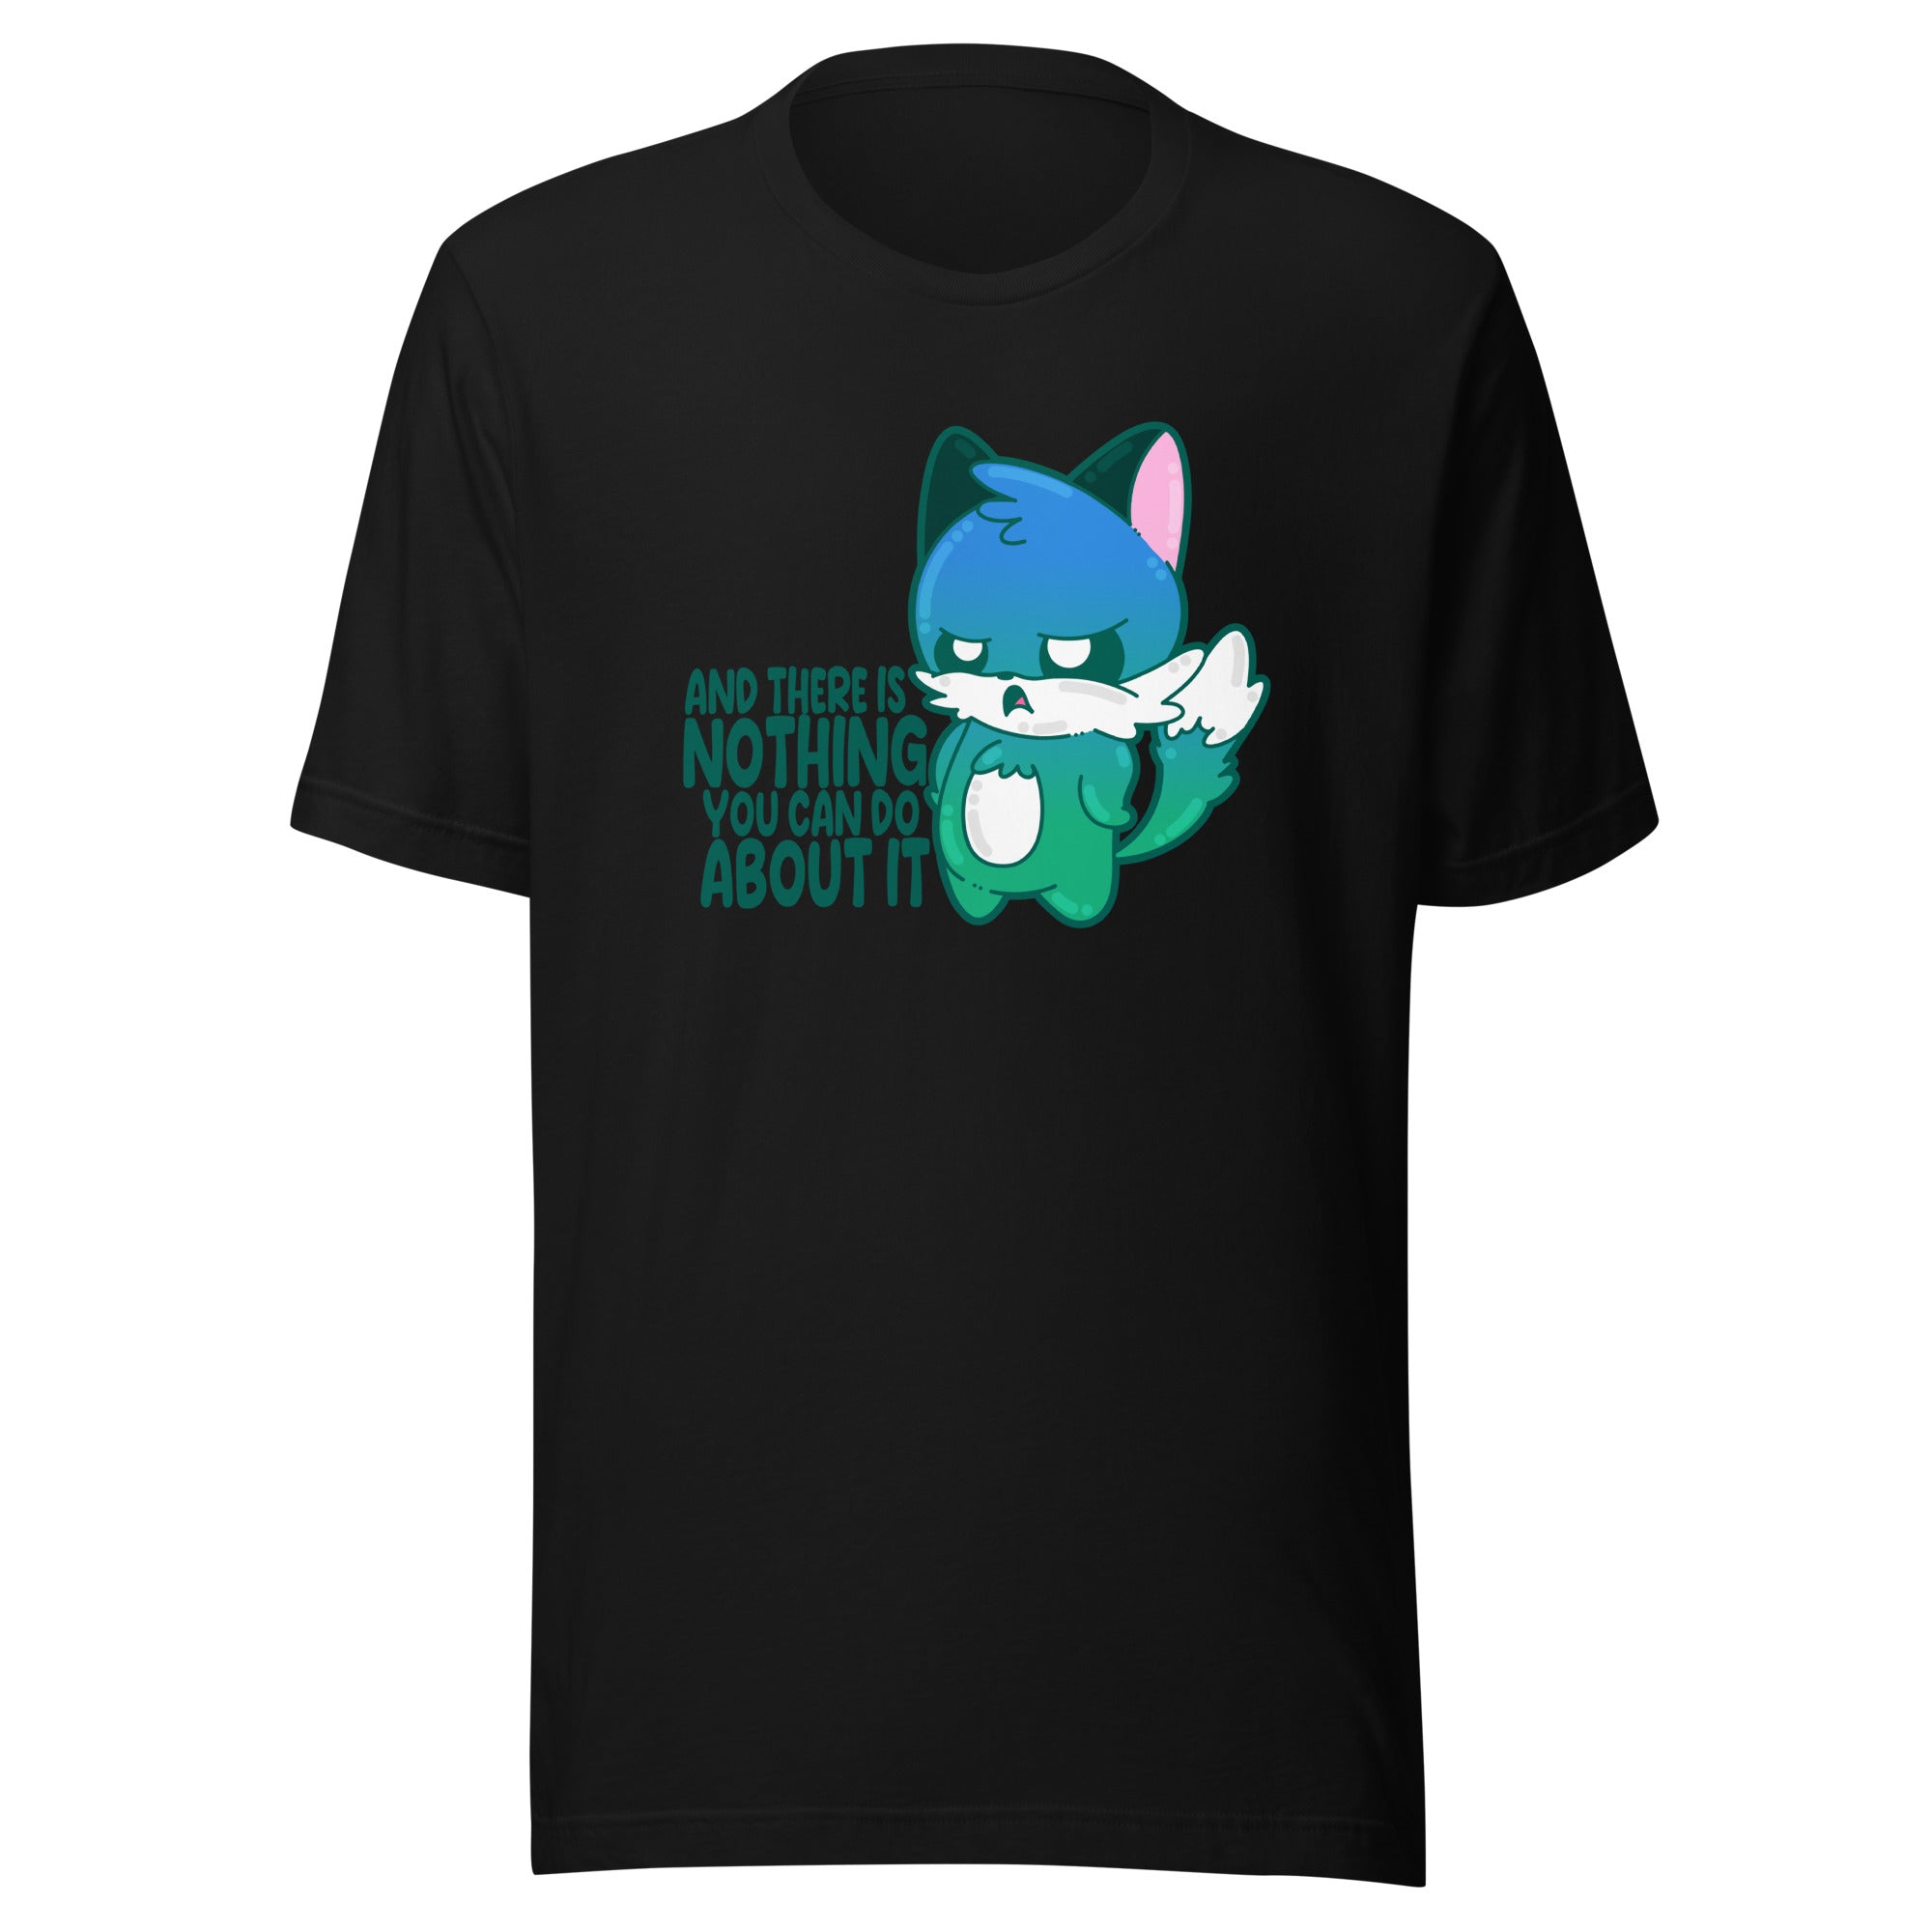 AND THERES NOTHING YOU CAN DO ABOUT IT - Tee - ChubbleGumLLC